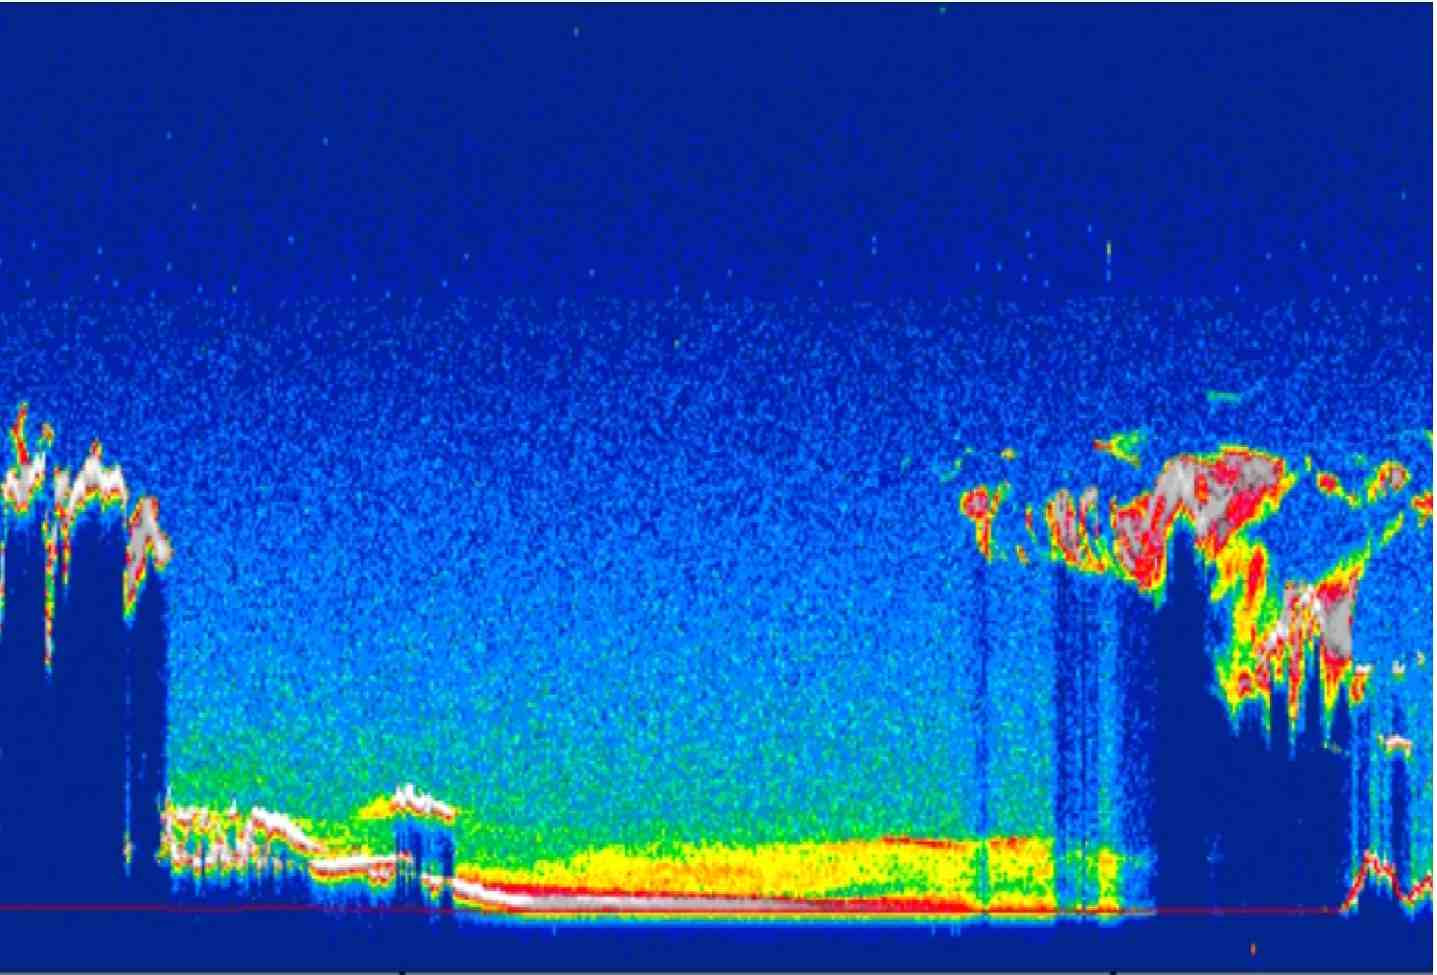 Image 1: CALIPSO's CALIOP sensor views the Deepwater Horizon oil spill on May 2, 2010. The low-lying red layer indicates the location of the aerosols over the spill. - Source: Atmospheric Science Data Center